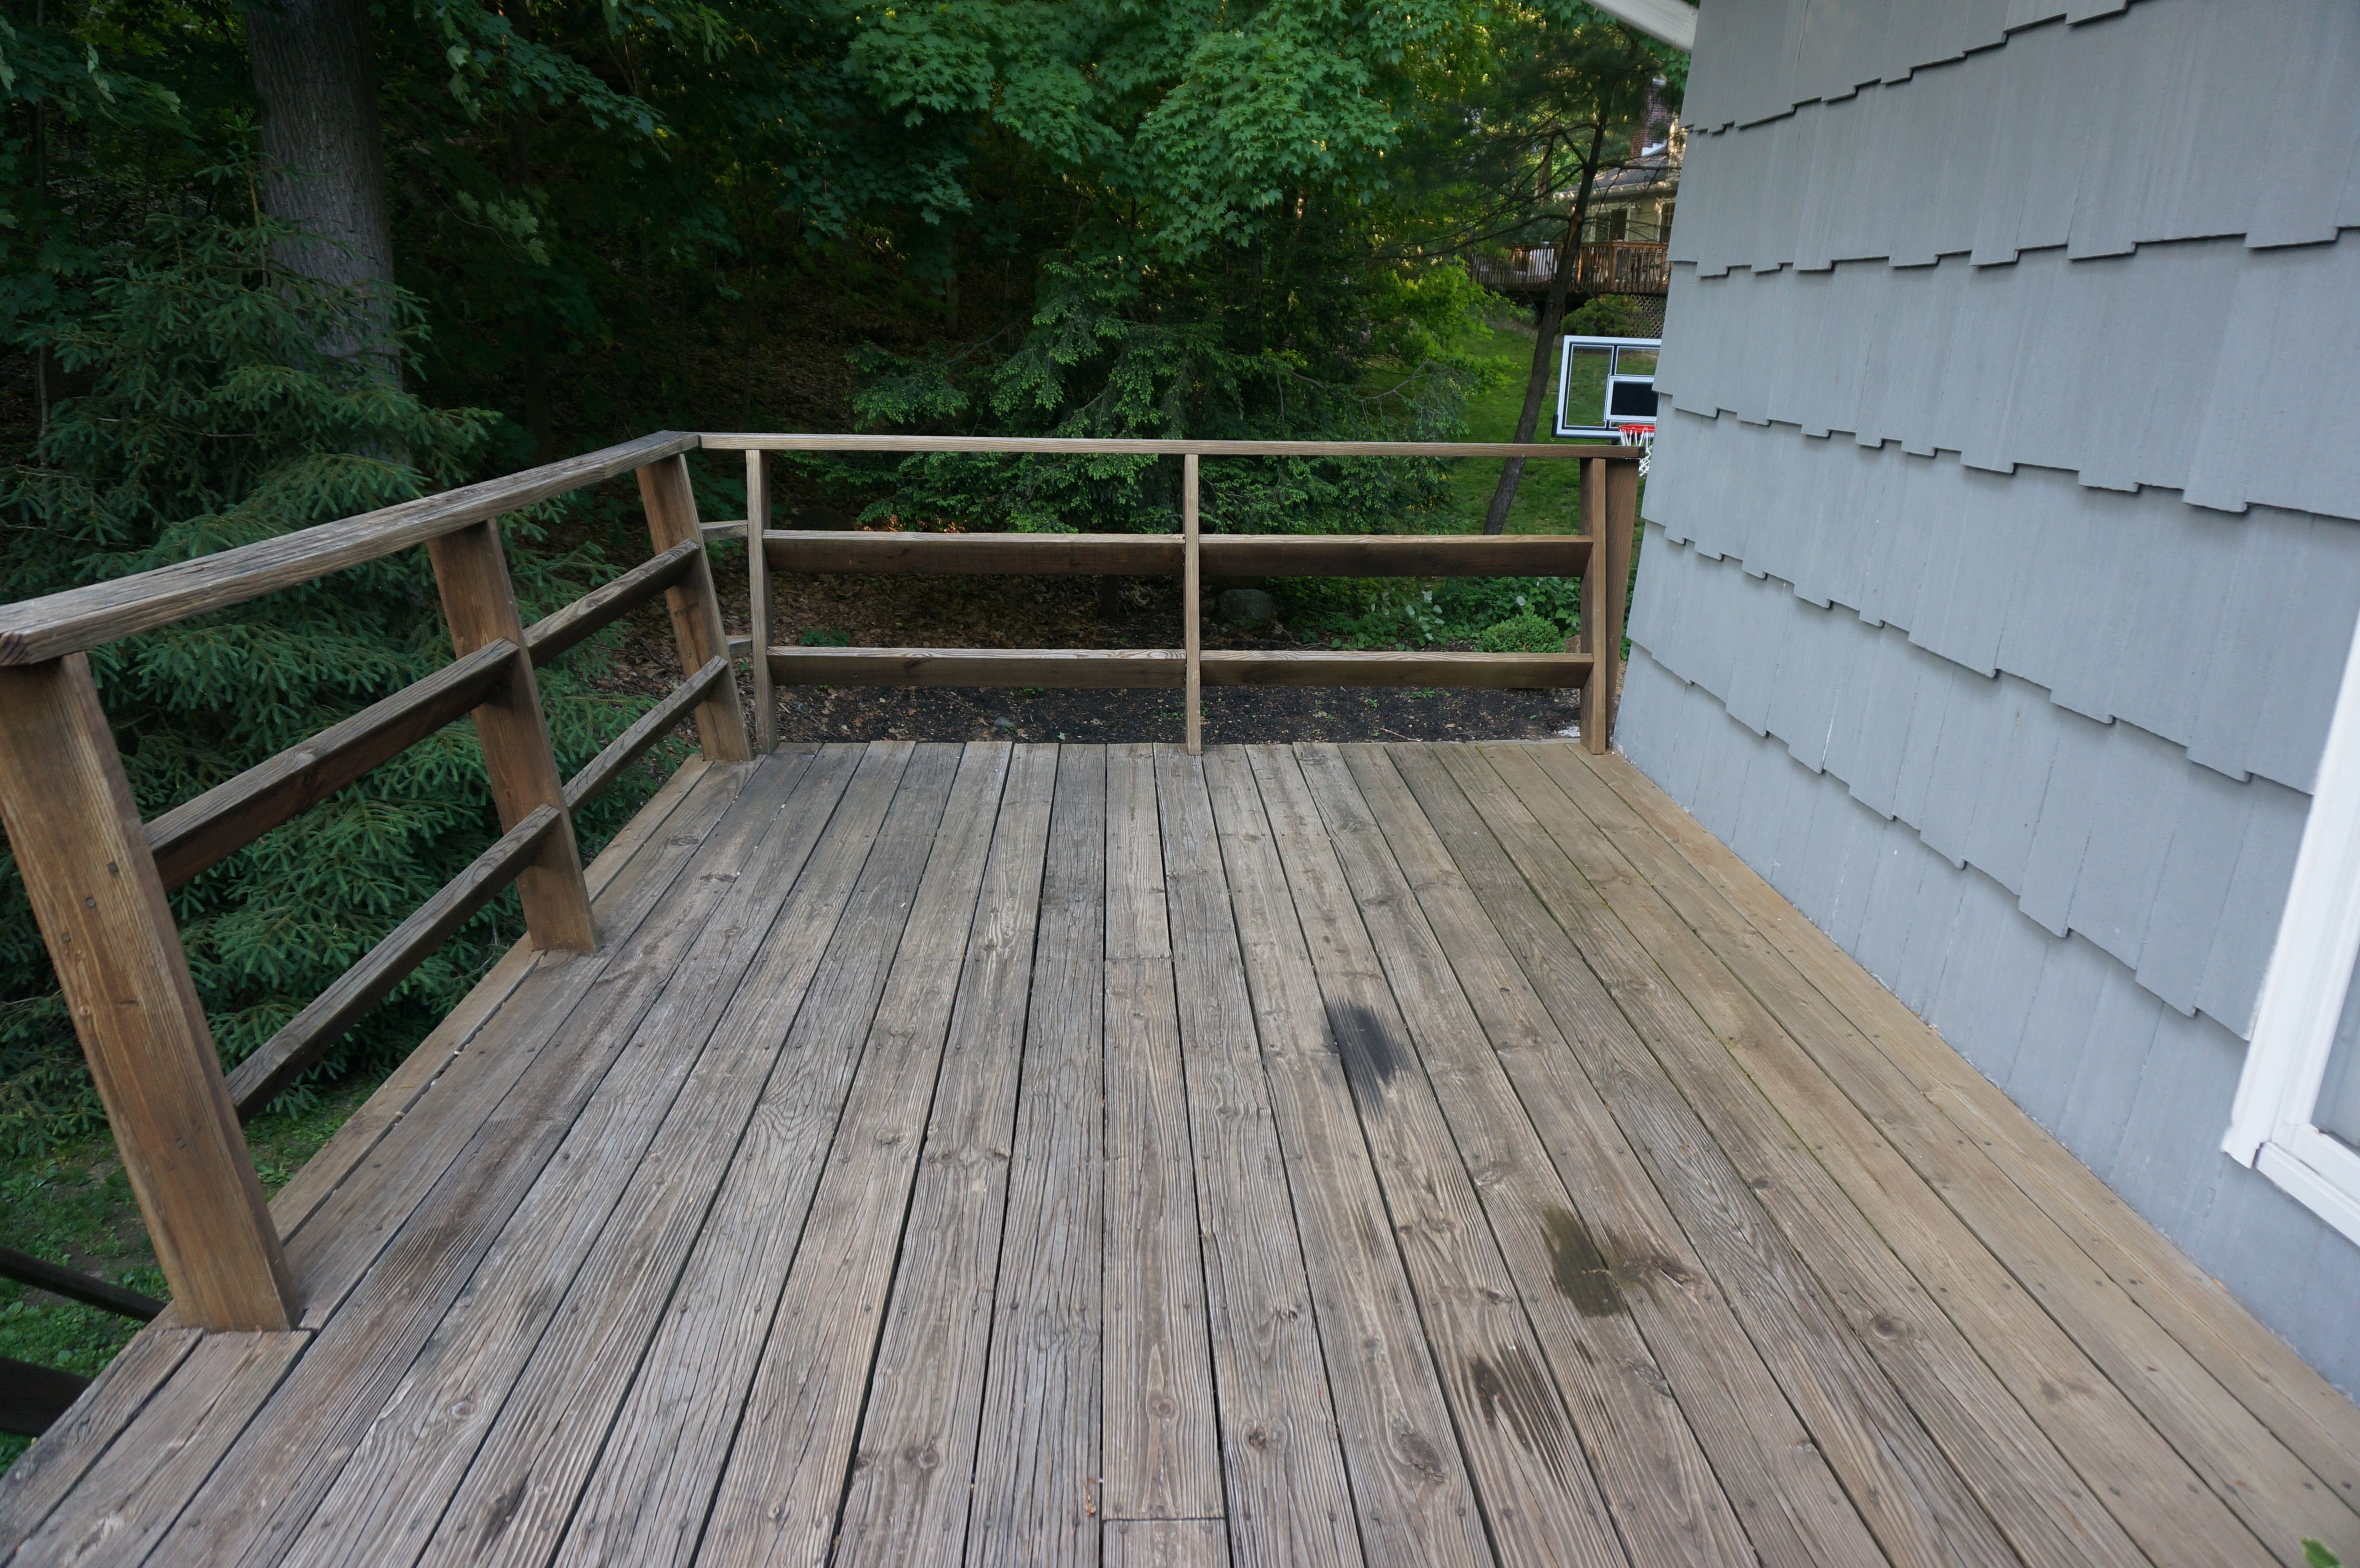 Exterior Design Deck Makeover With Regard To Outdoor Rugs For Deck (View 8 of 15)